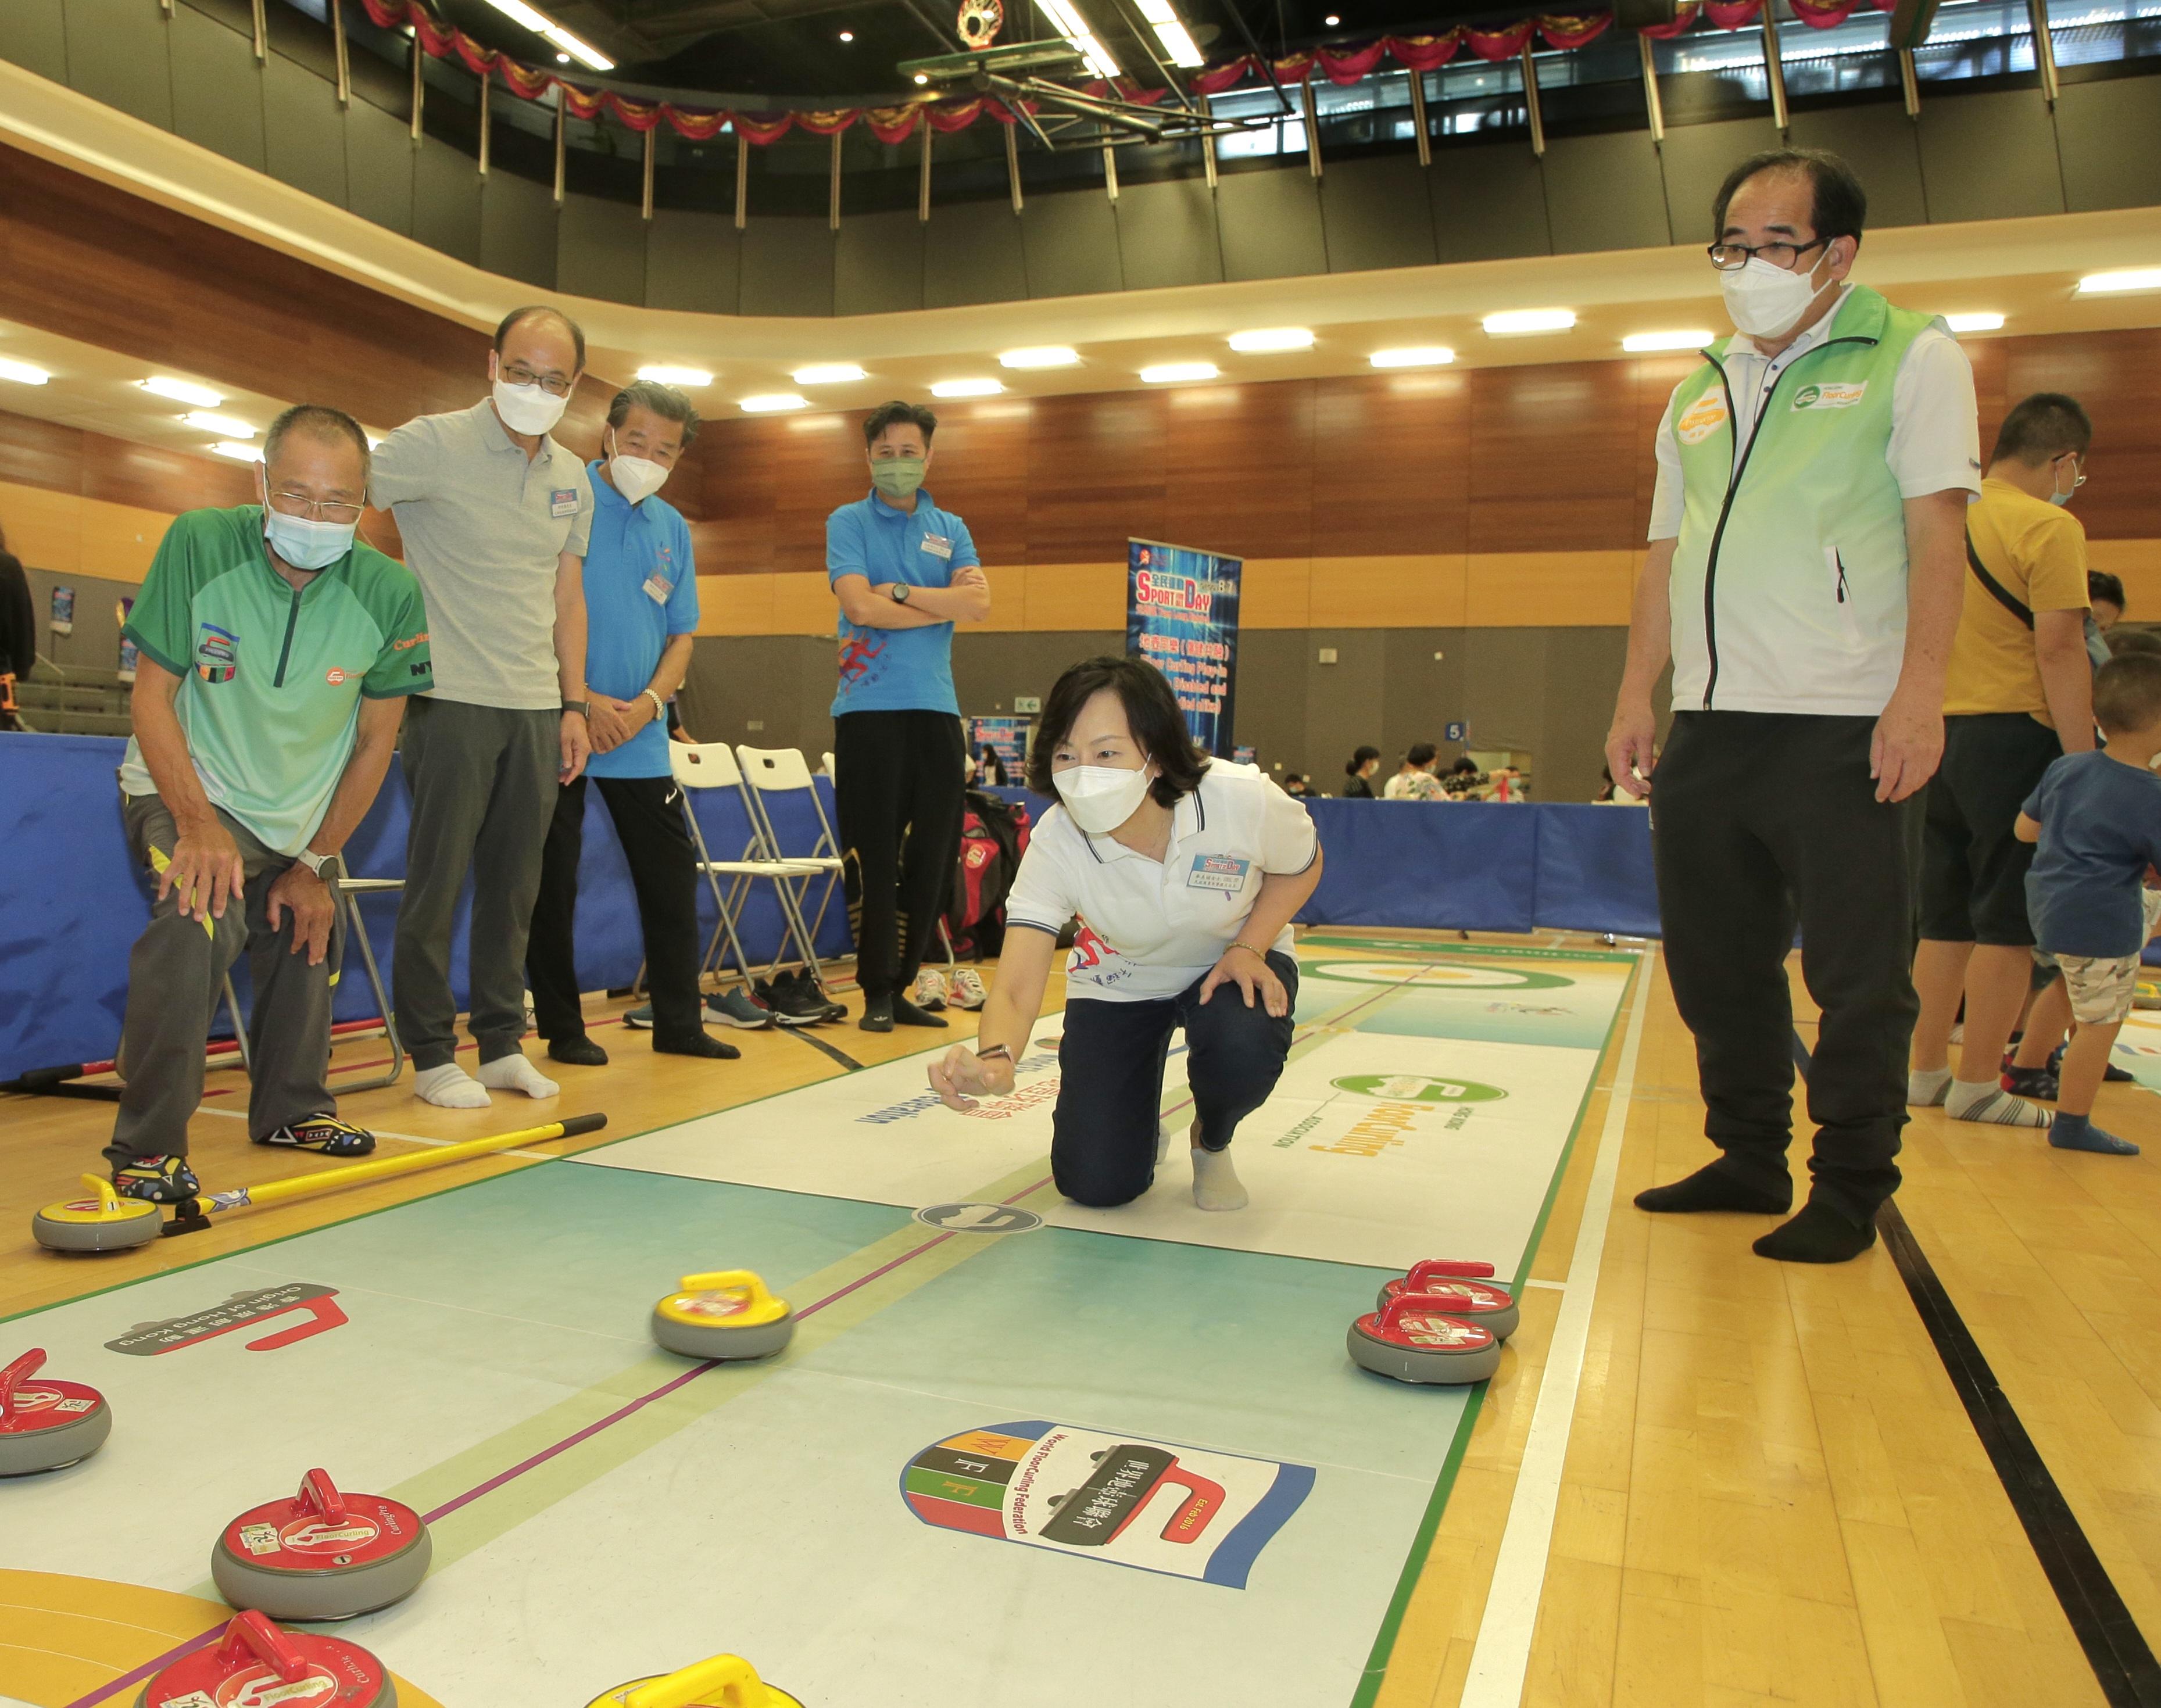 The Secretary for Home and Youth Affairs, Miss Alice Mak, today (August 7) participated in Sport For All Day 2022 activities at the Tin Fai Road Sports Centre in Yuen Long District to bring the message of stay active, healthy and happy to the public. Photo shows Miss Mak (second right) participating in a floor curling session.